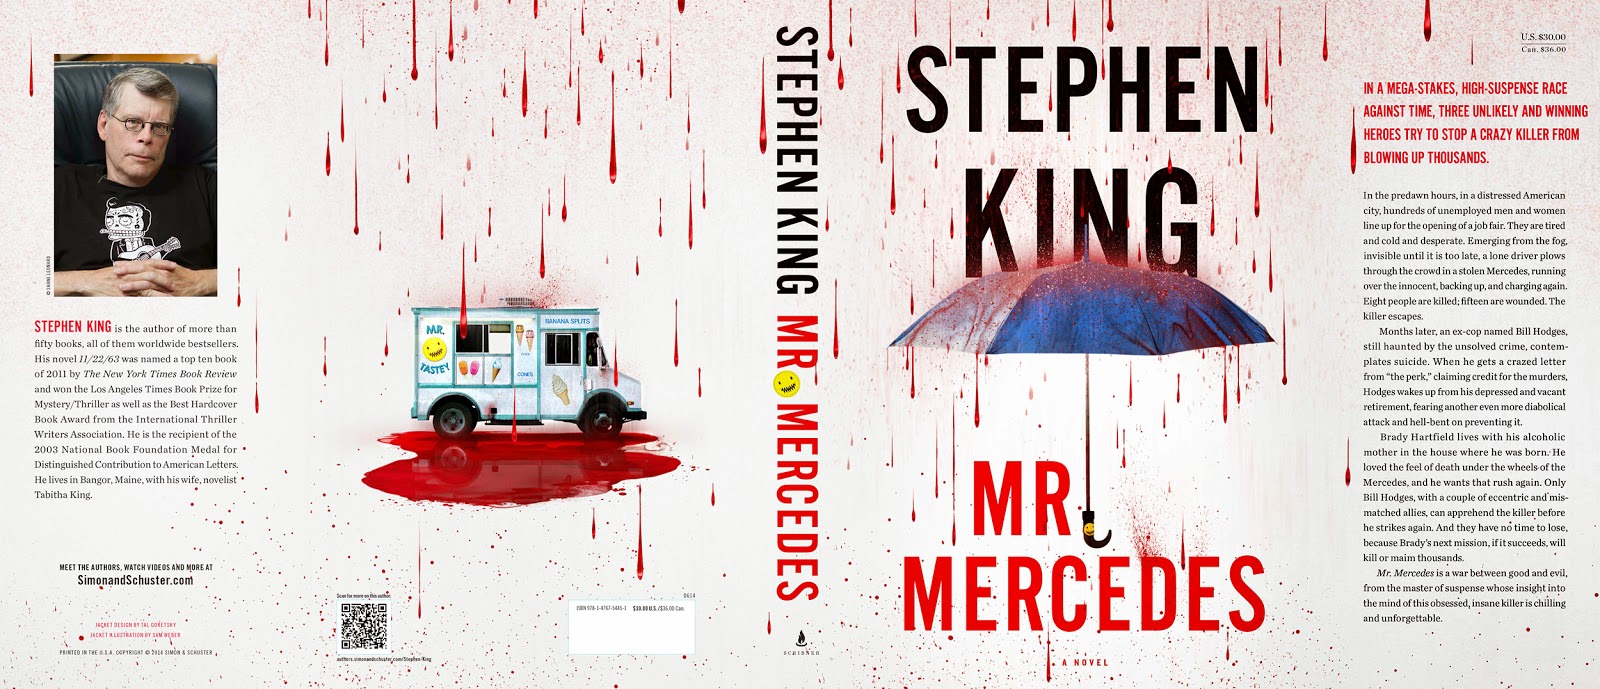 Mister Mercedes - book review - stephen king